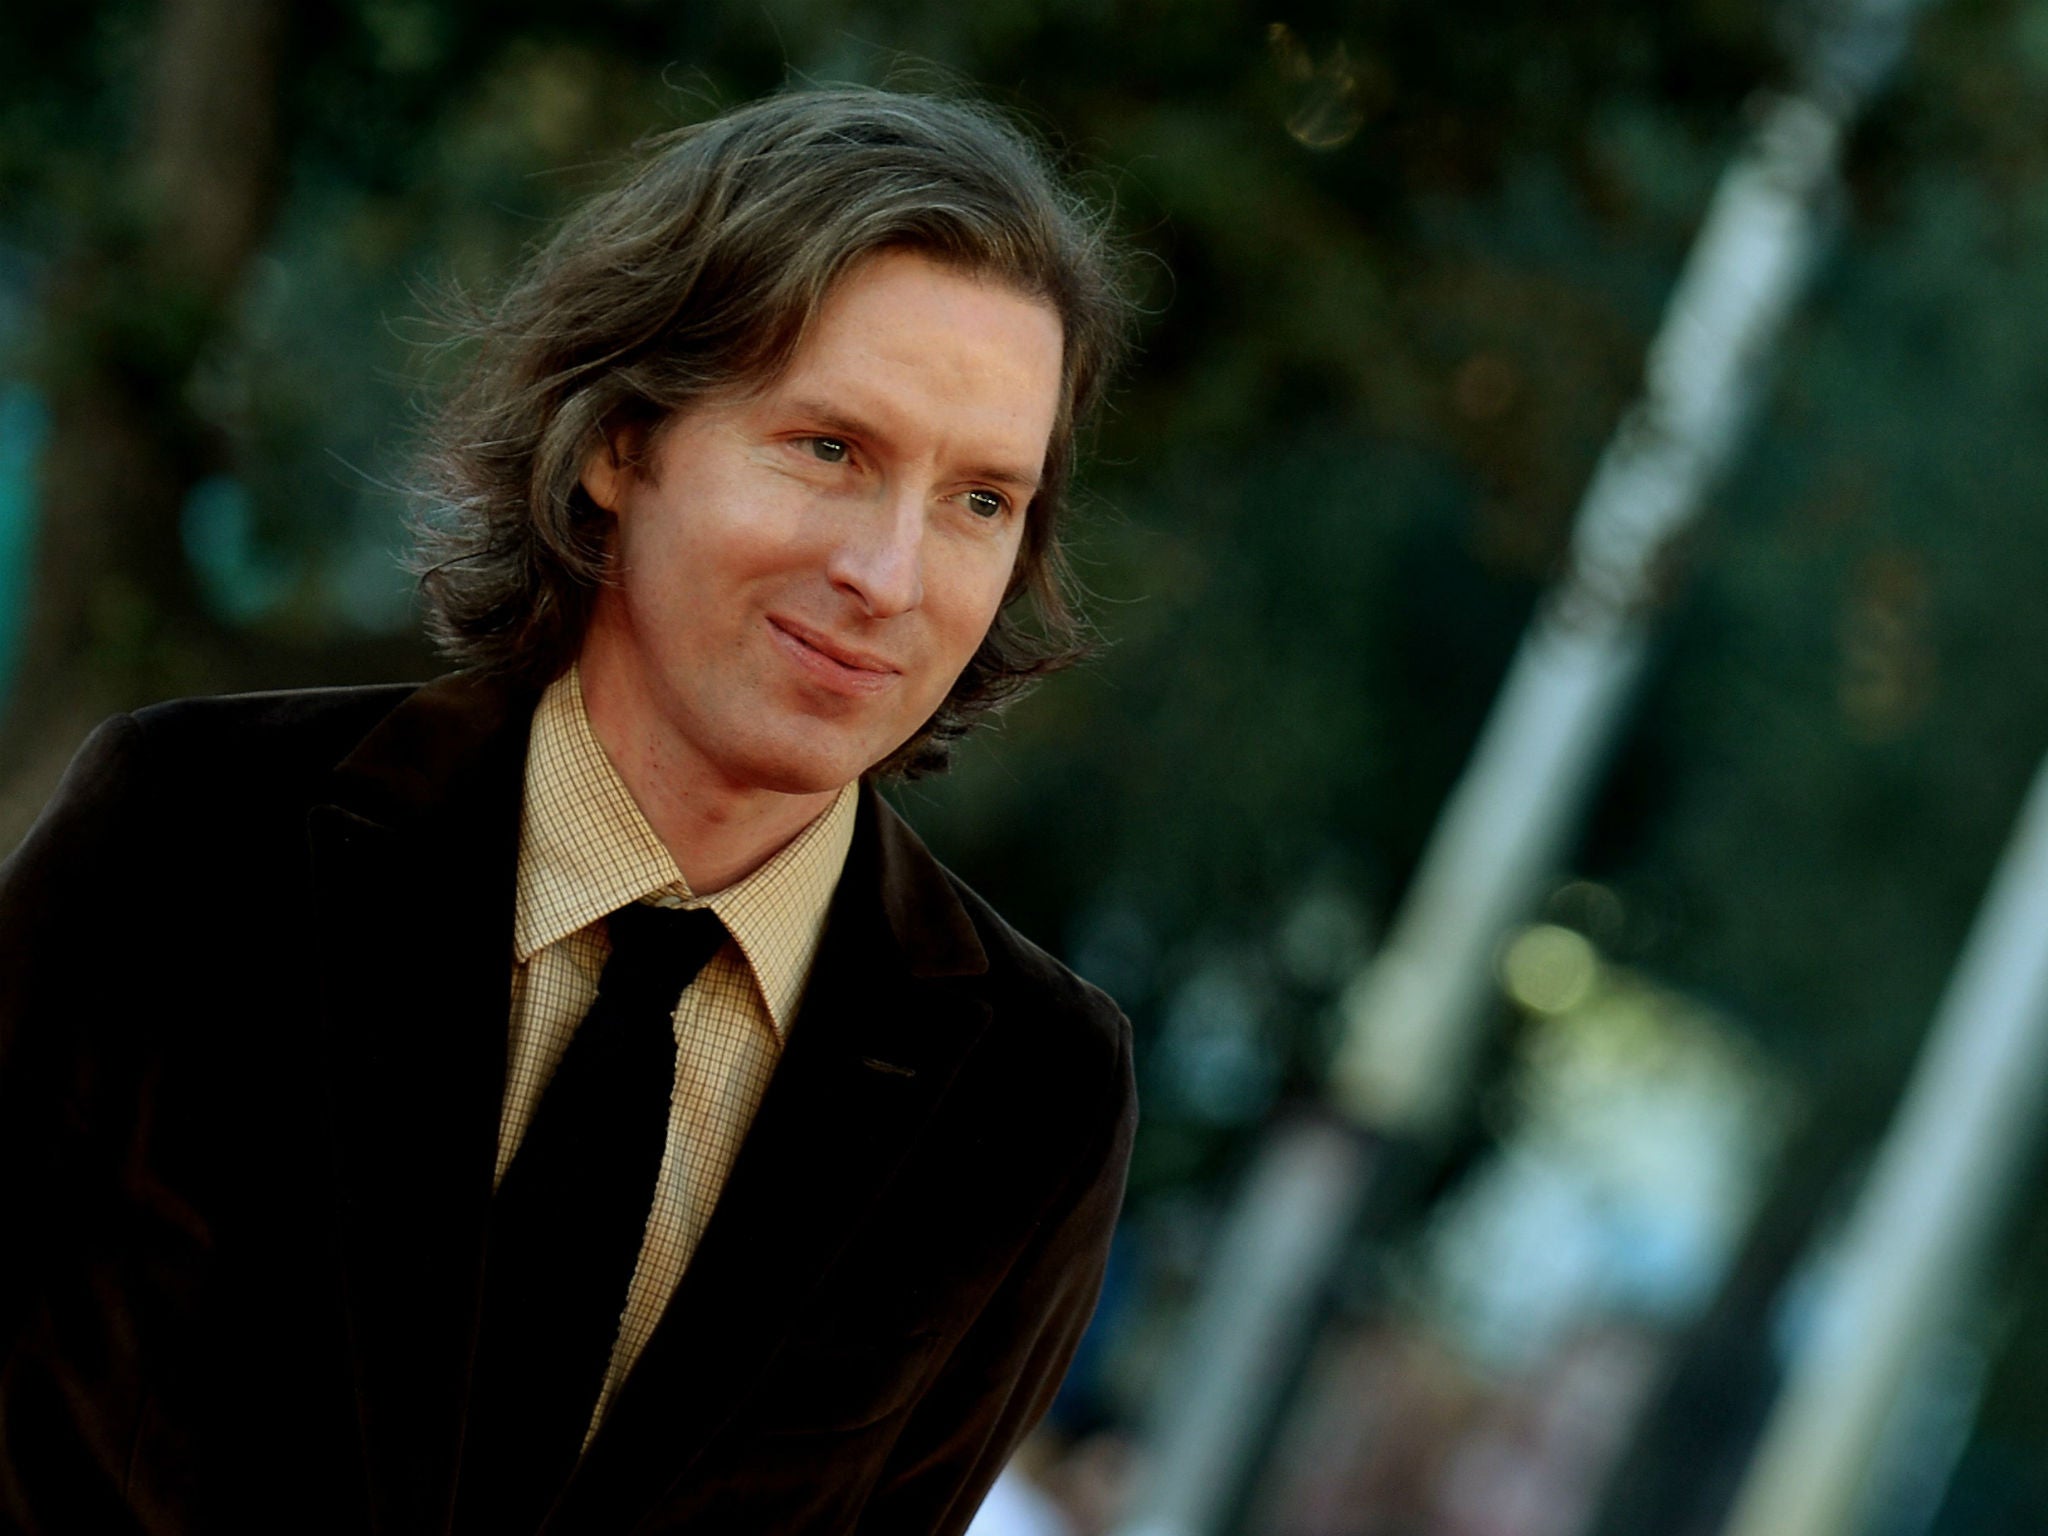 Oscar-nominated writer and director Wes Anderson has not properly experimented with horror before